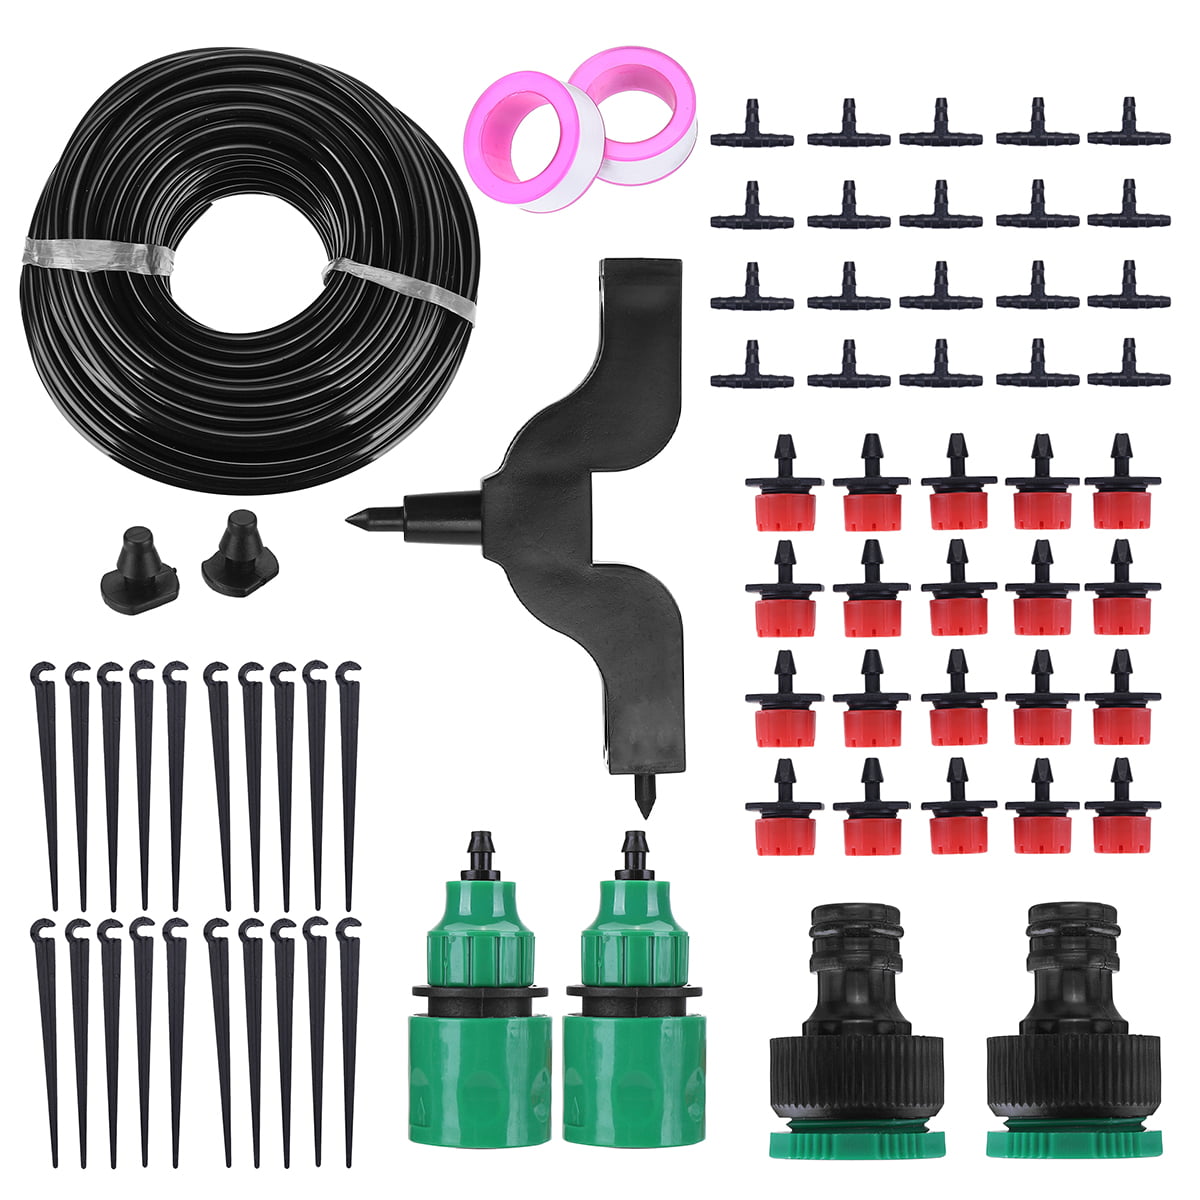 annotebestus DIY Drip Irrigation System Kit with Connector Lawn 1/4 15M Hose Outdoor Patio Adjustable Sprinkler Dripper Greenhouse Micro Drip Automatic Watering for Pot